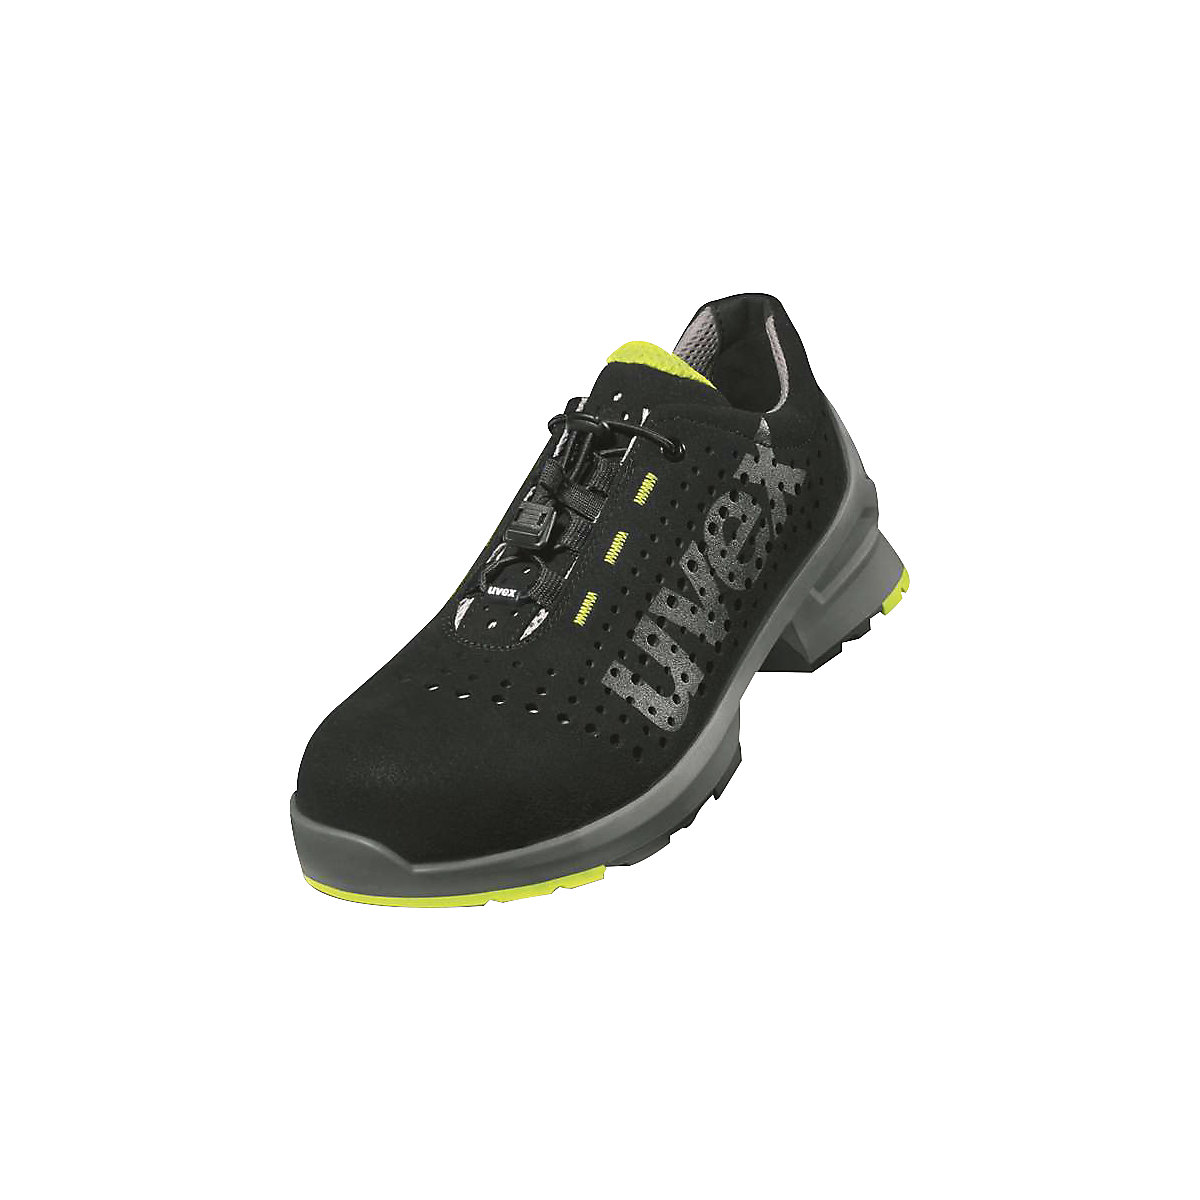 ESD S1 SRC safety lace-up shoe – Uvex